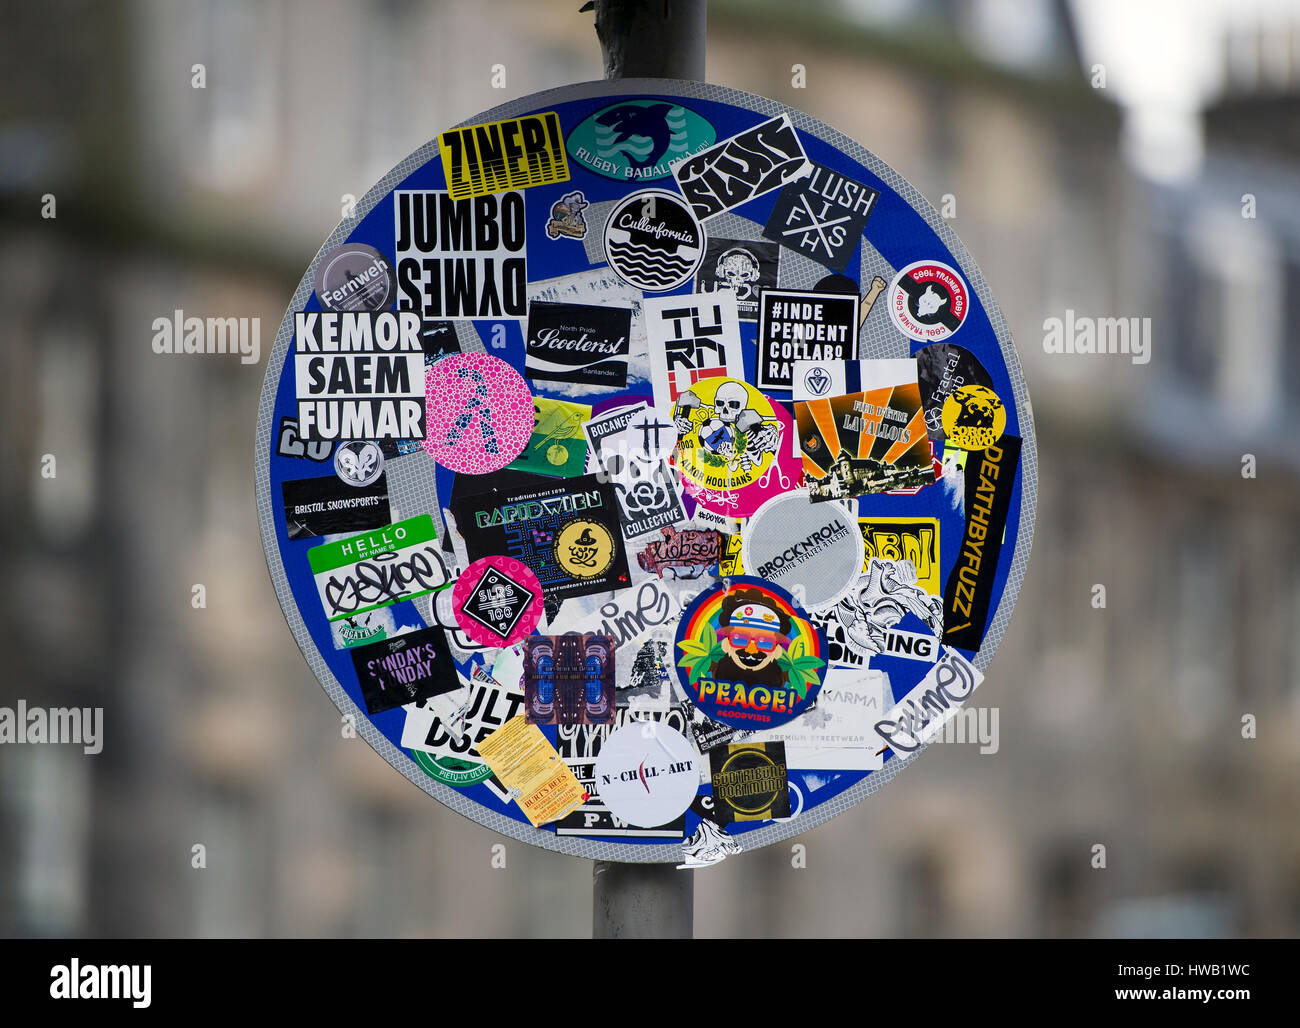 A road sign in Edinburgh covered in advertising flyers and stickers obscuring the traffic direction sign. Stock Photo